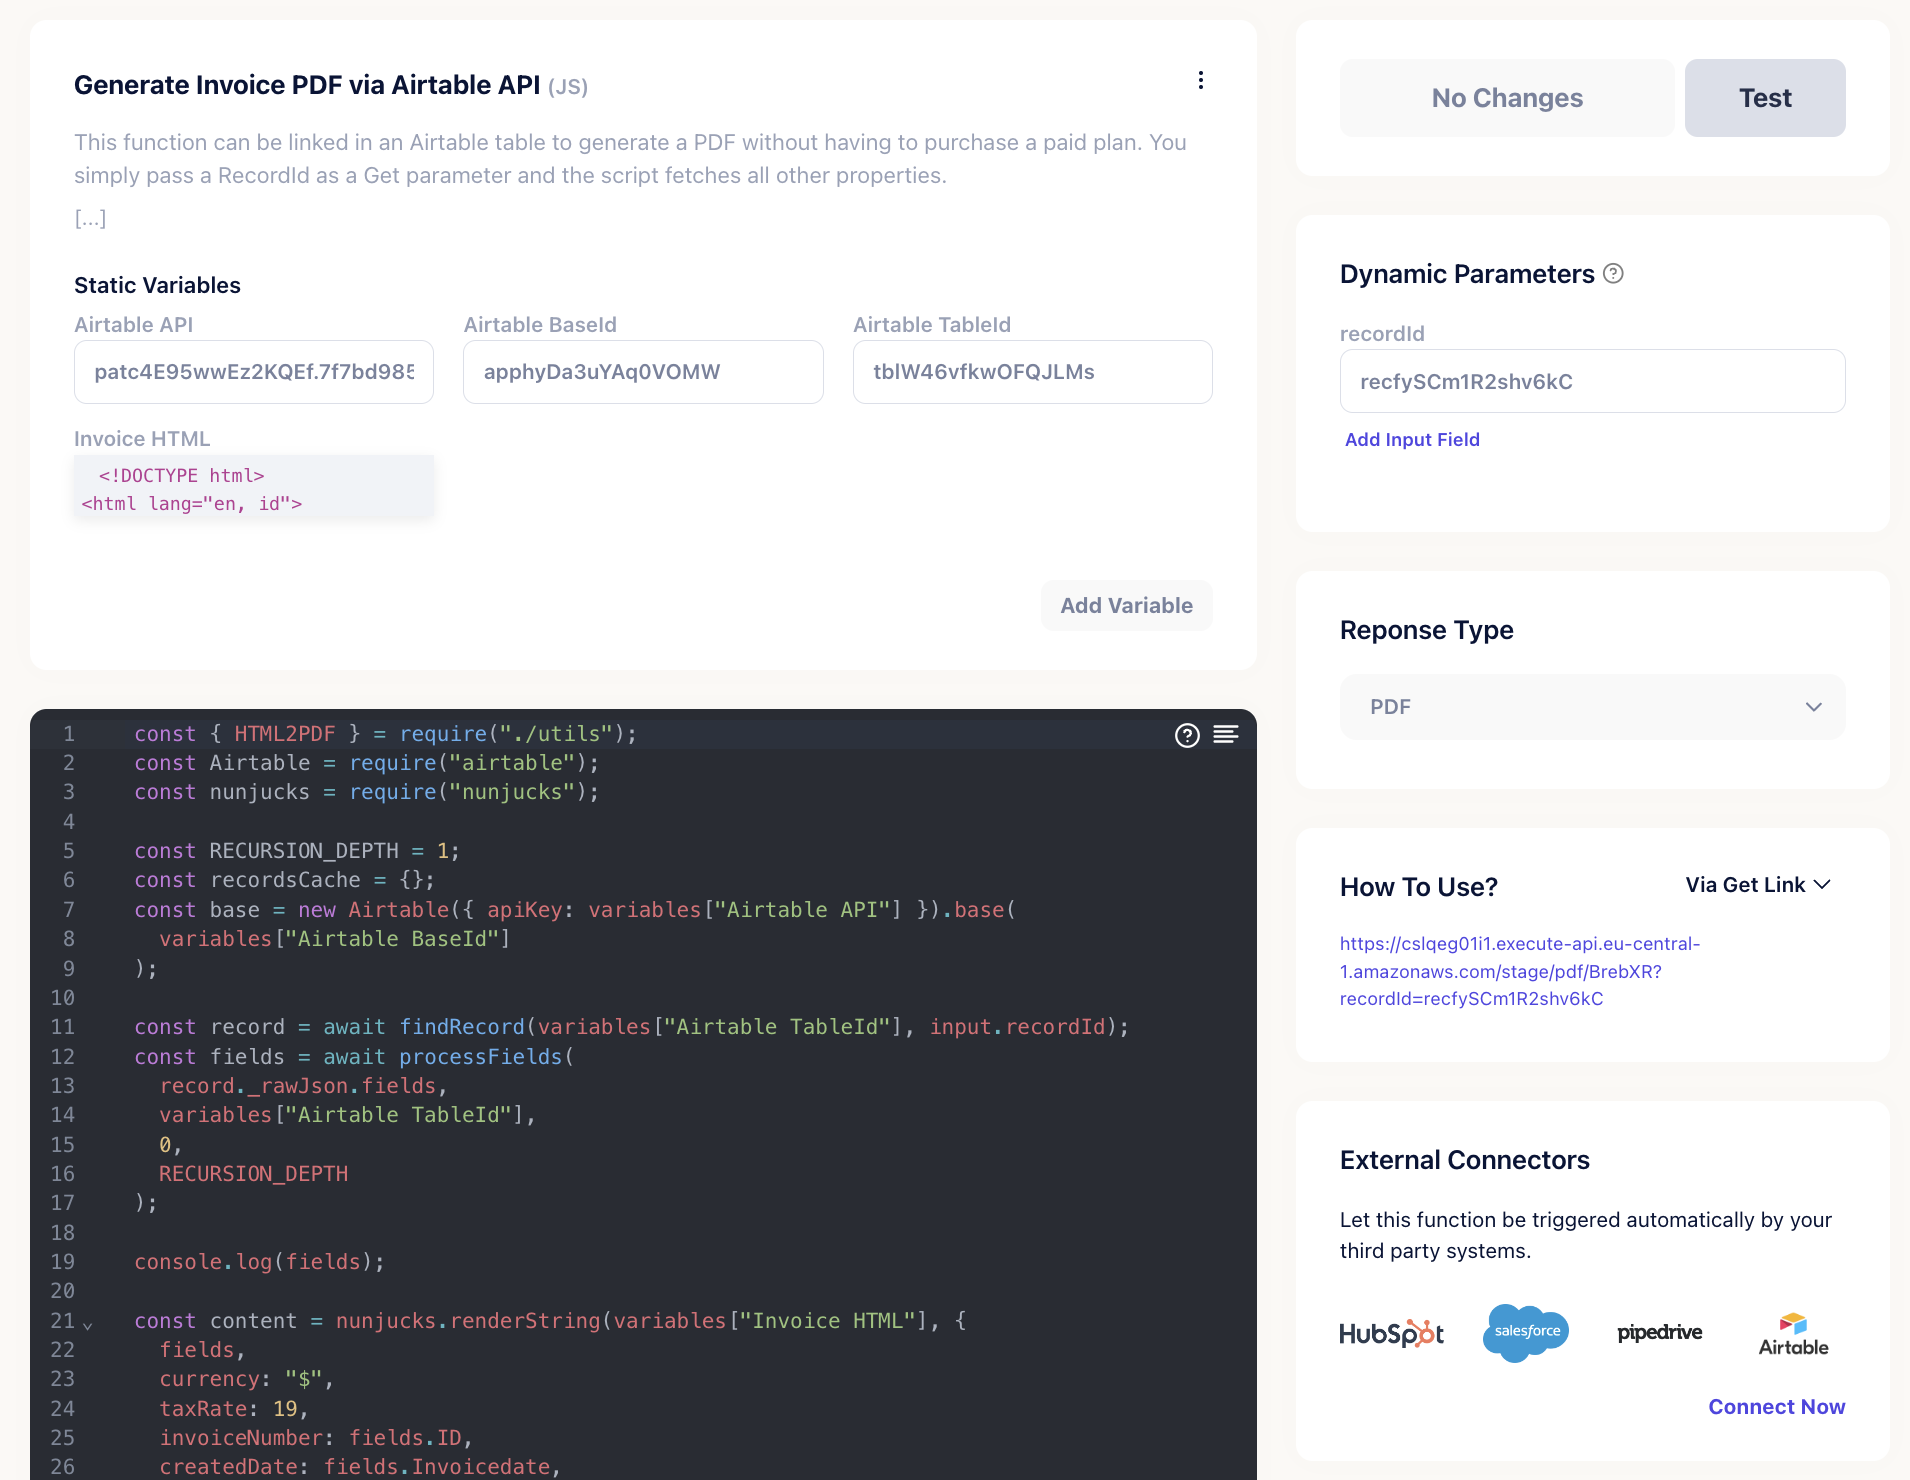 startuptile CustomJS-Integrate custom logic with JavaScript into any software